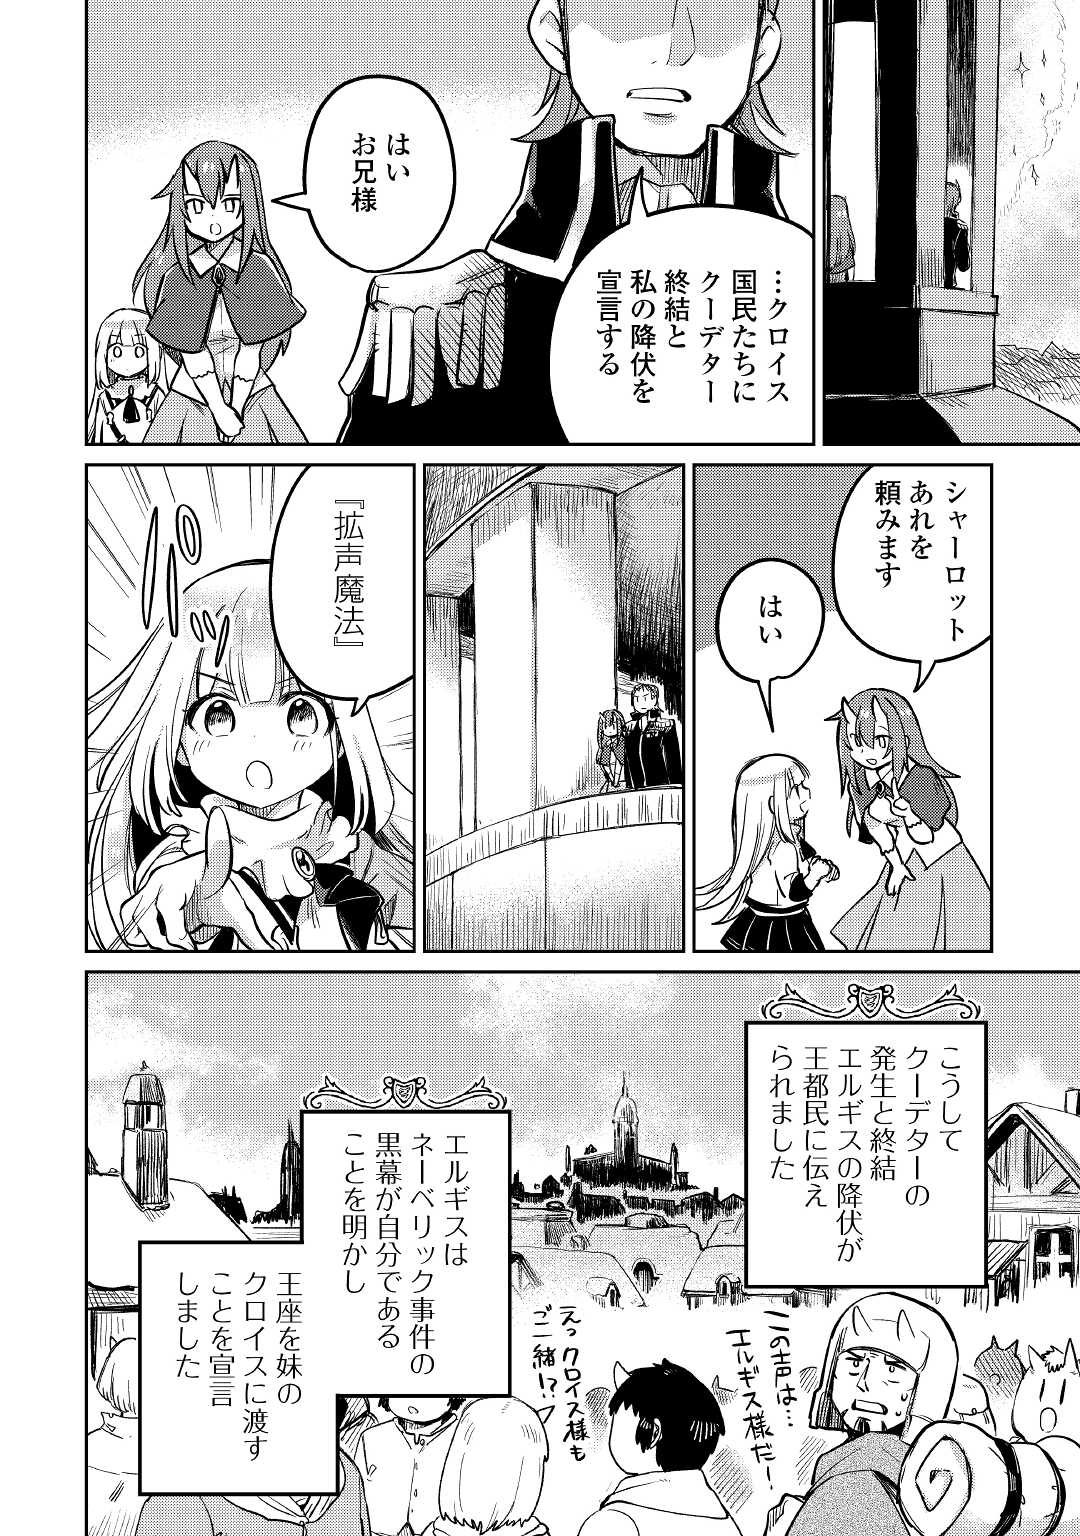 The Former Structural Researcher’s Story of Otherworldly Adventure 第40話 - Page 20